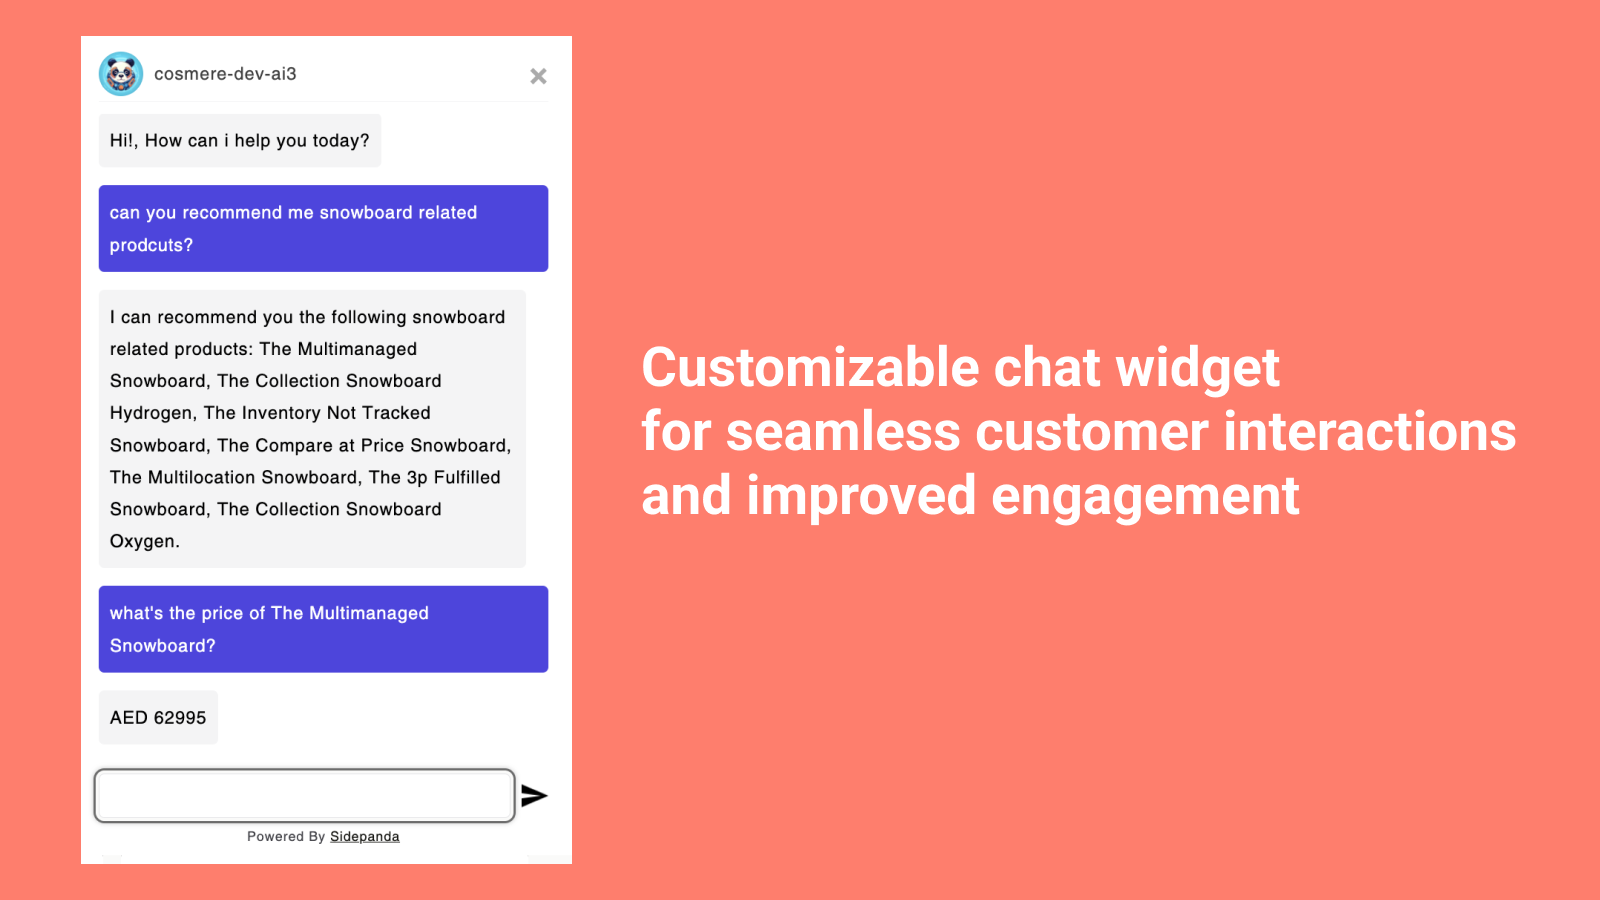 Customizable chat widget for seamless customer interactions  an